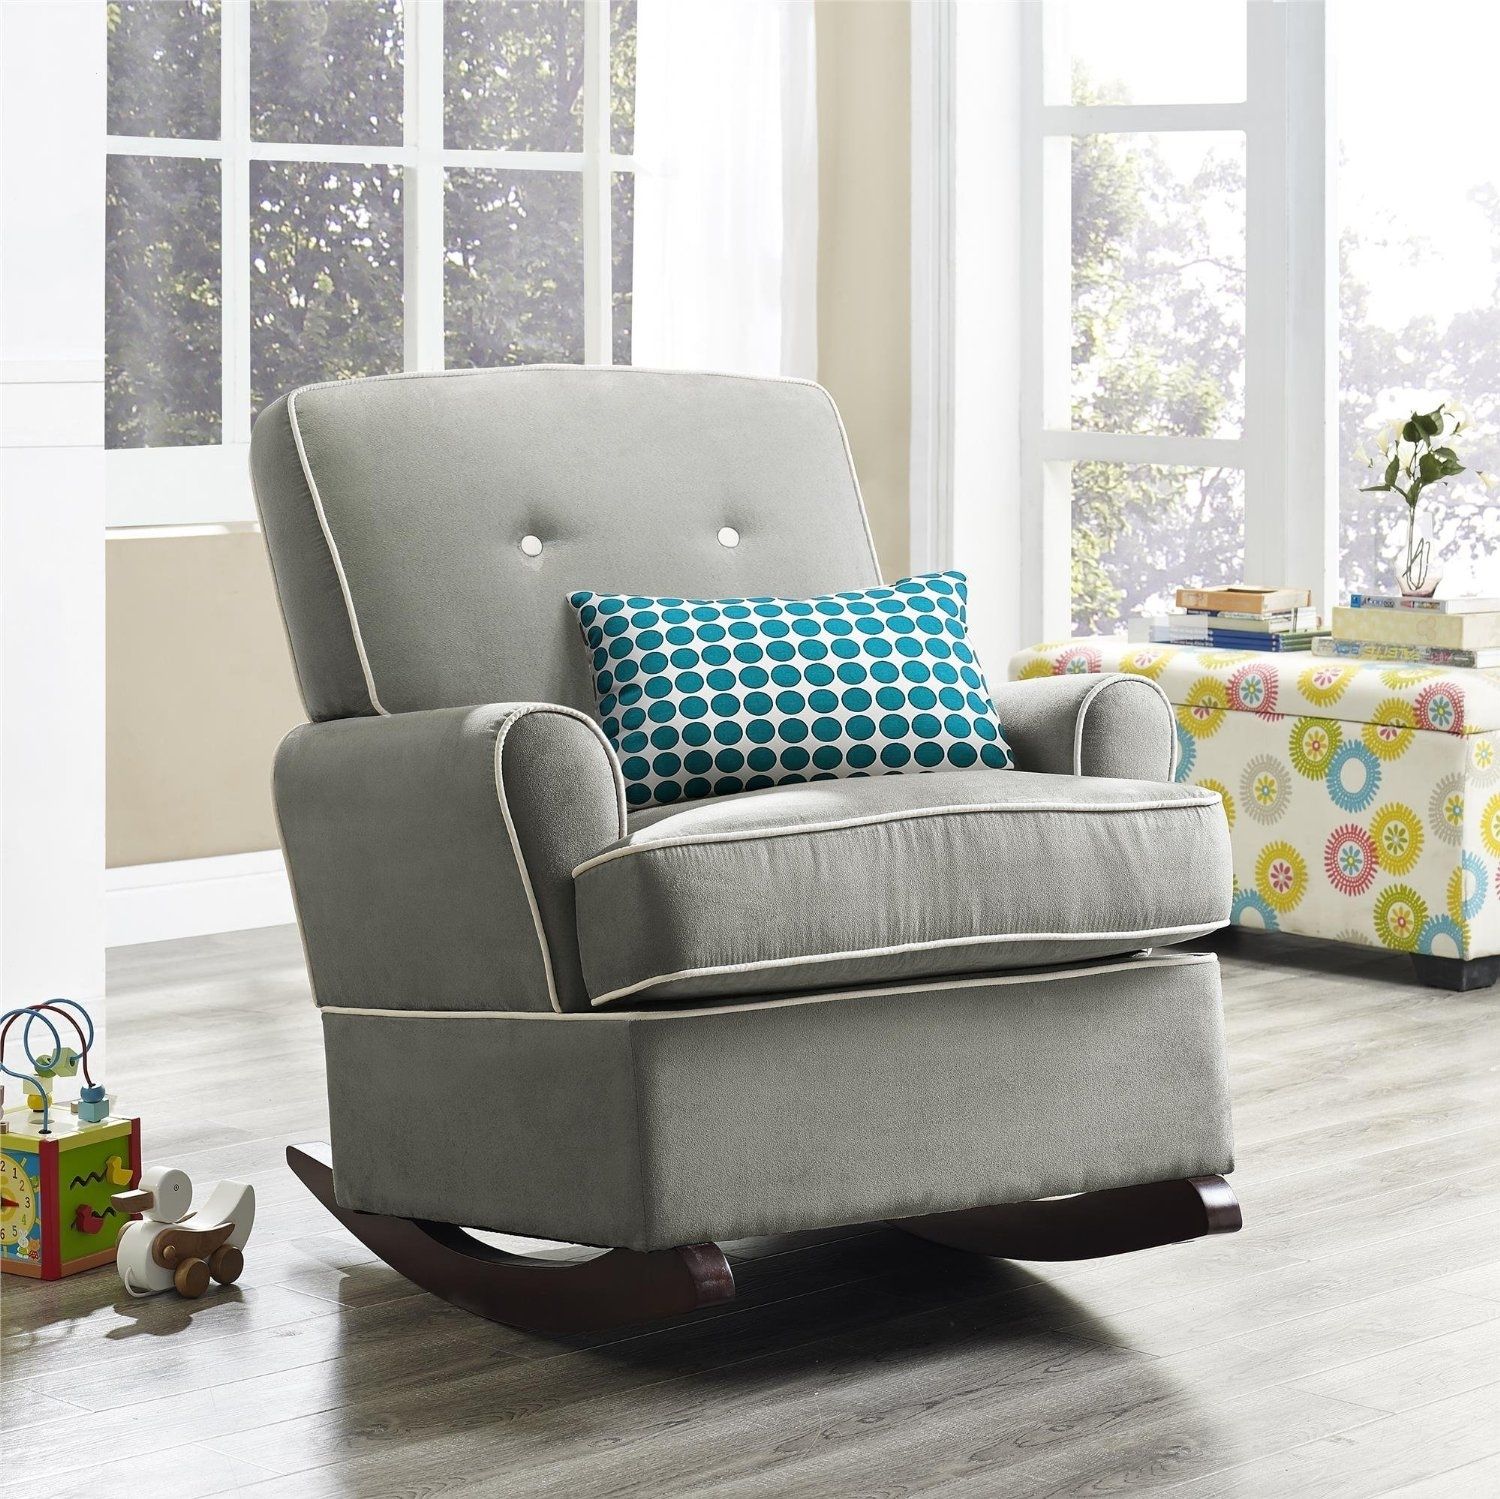 The Best Upholstered Rocking Chair 2018 | Best Rocking Chairs Throughout Upholstered Rocking Chairs (Photo 10 of 15)